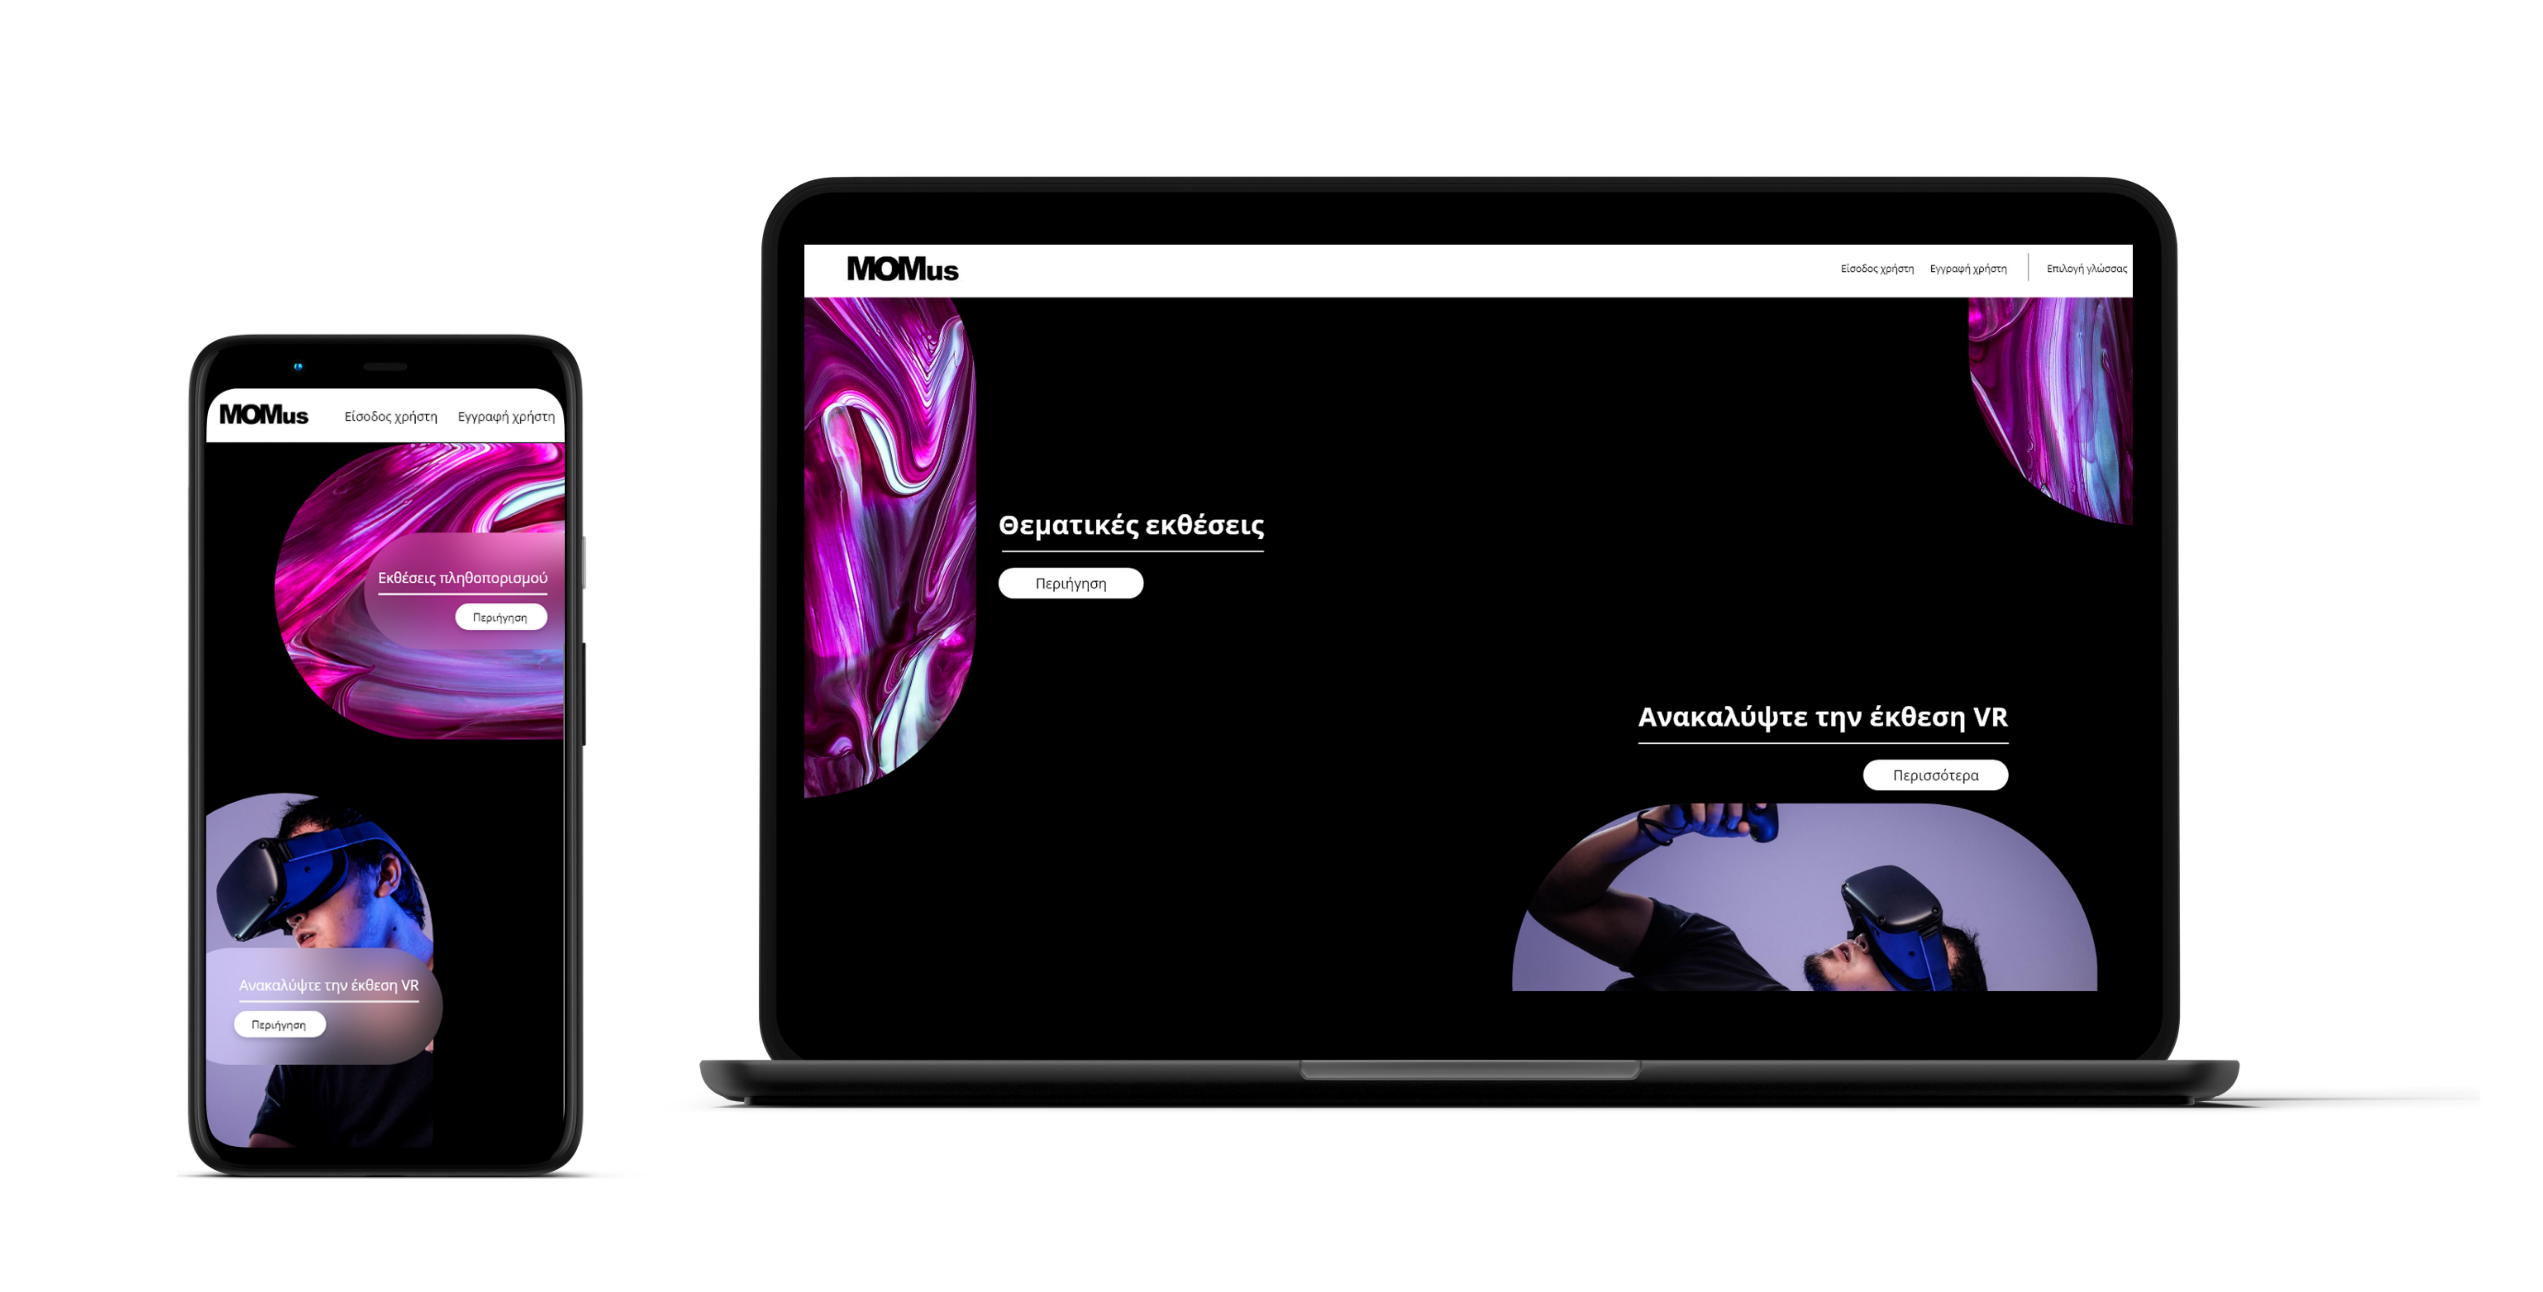 Concept A, an example of a homepage